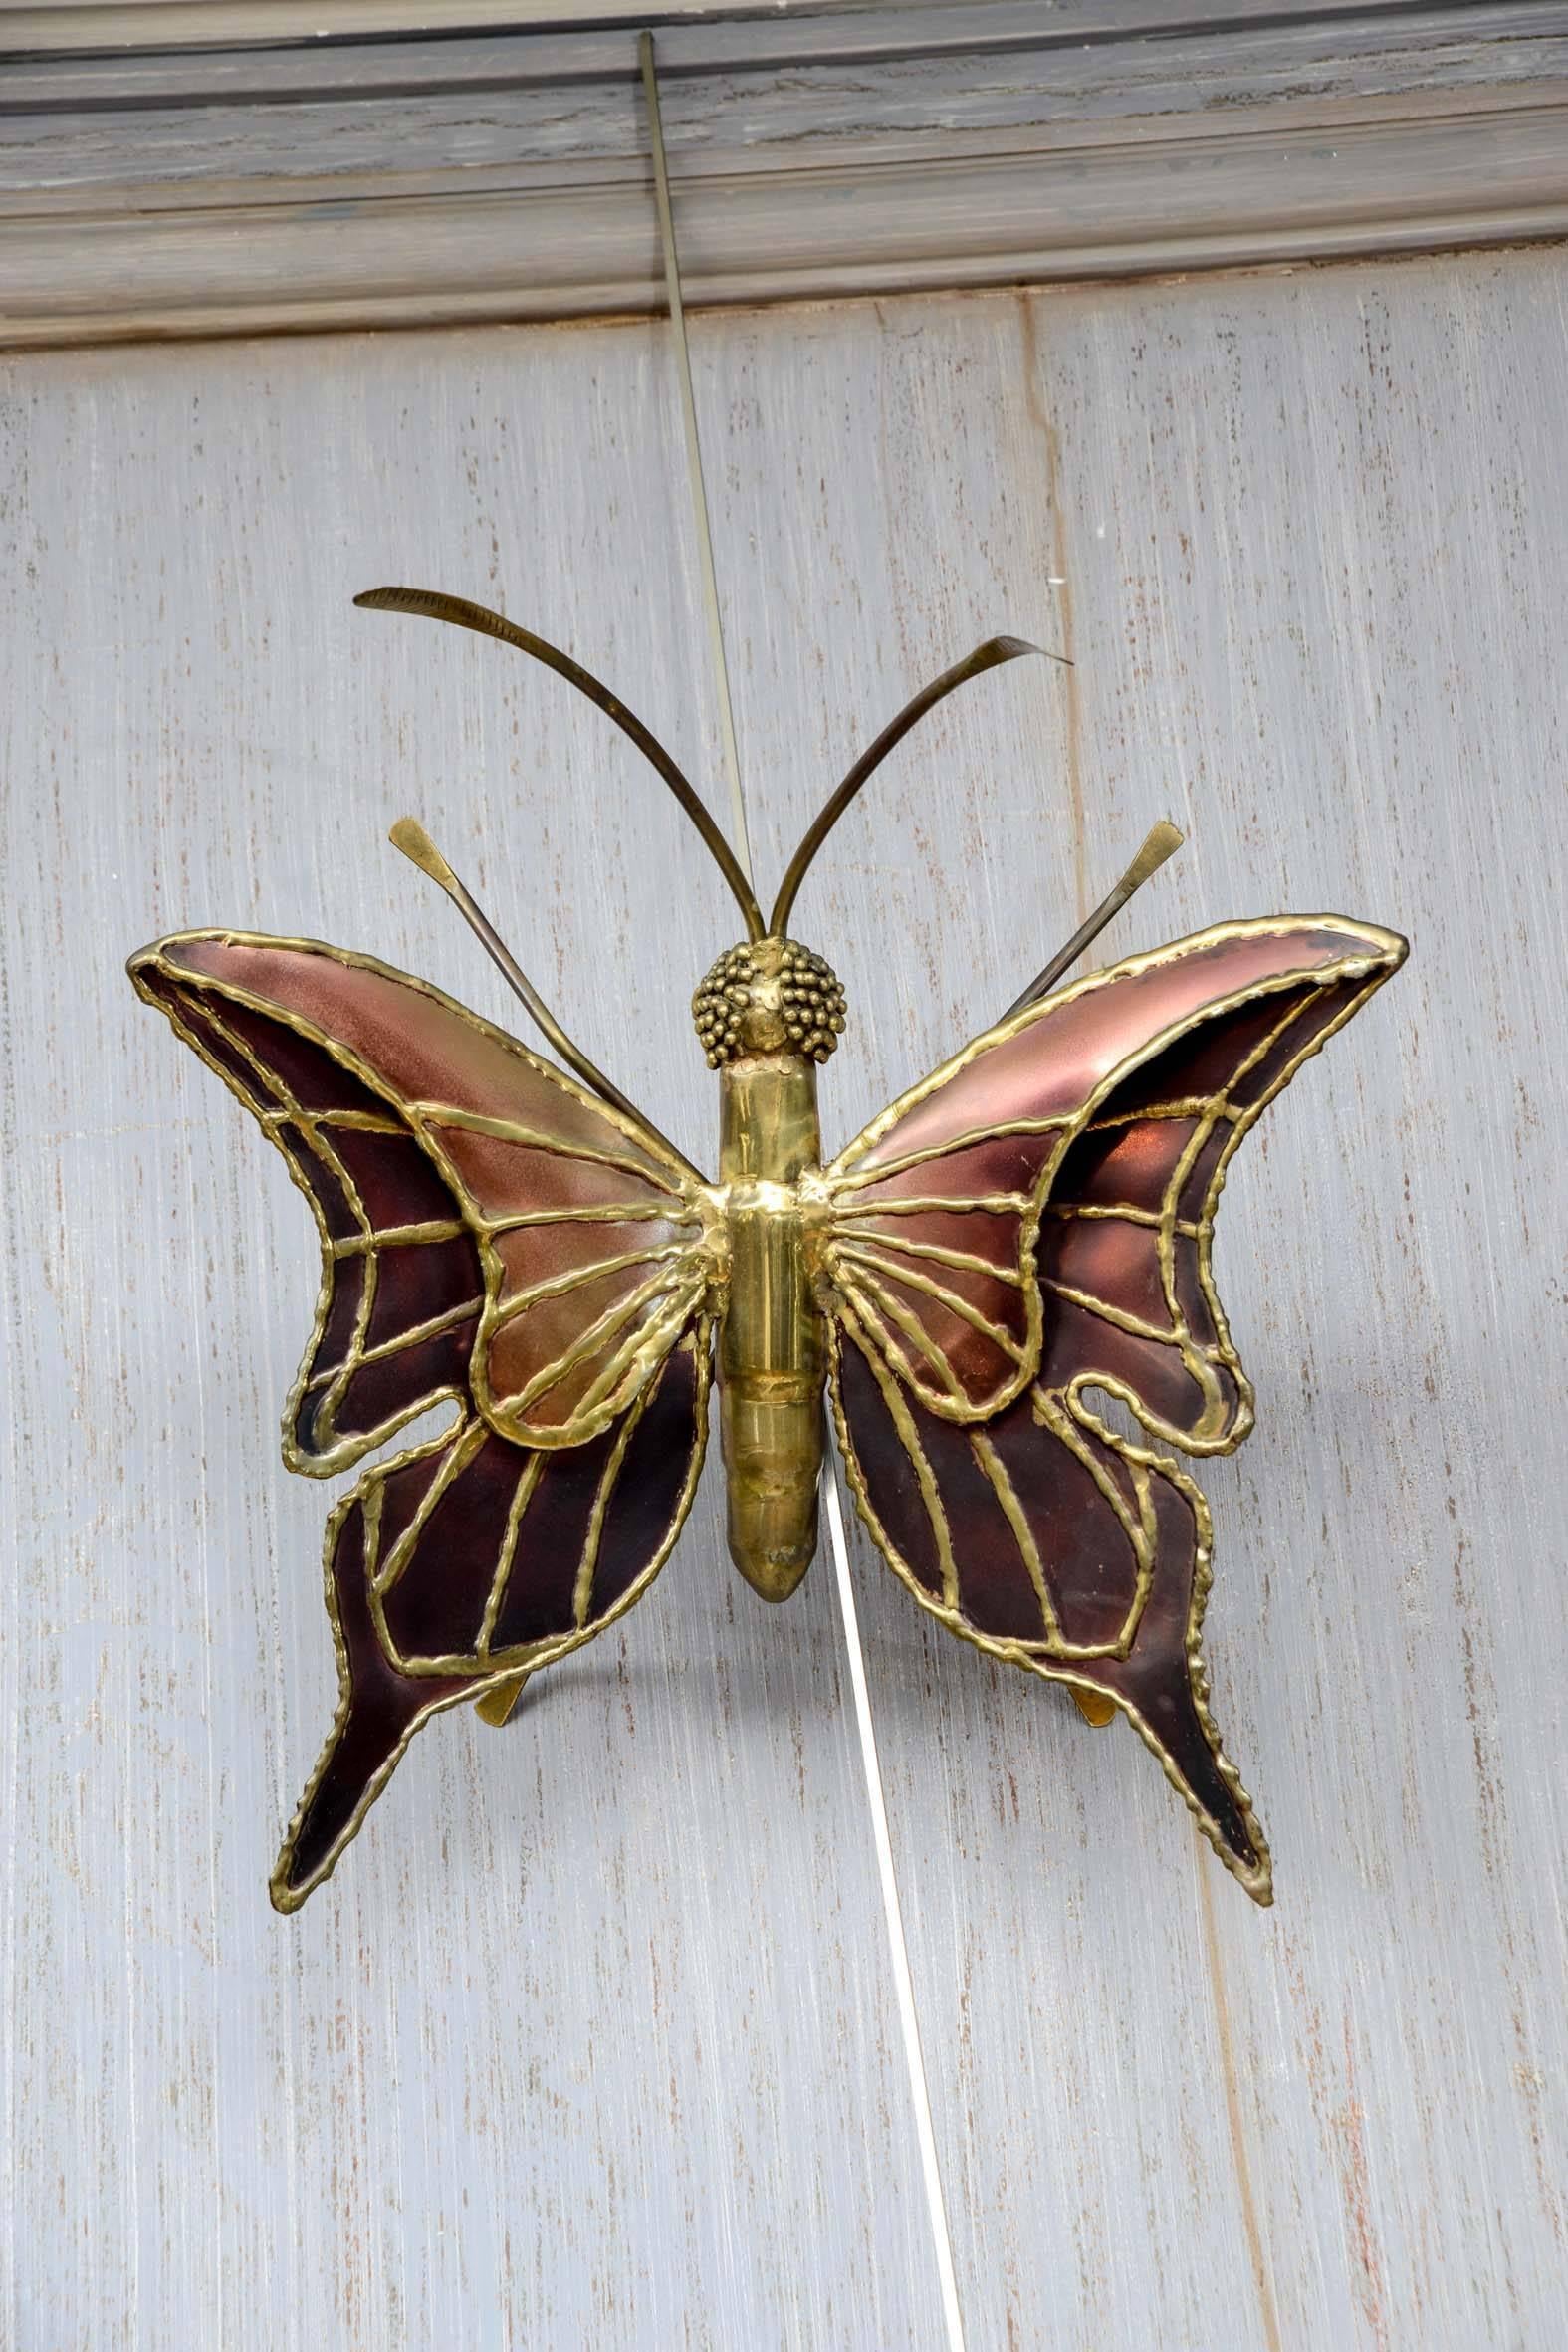 Pair of butterfly sconces, the large model is electrified, the other is for decoration purpose.
Dimensions of the large sconce: 63 X 63 cm.
Small one: 39 X 39 cm.